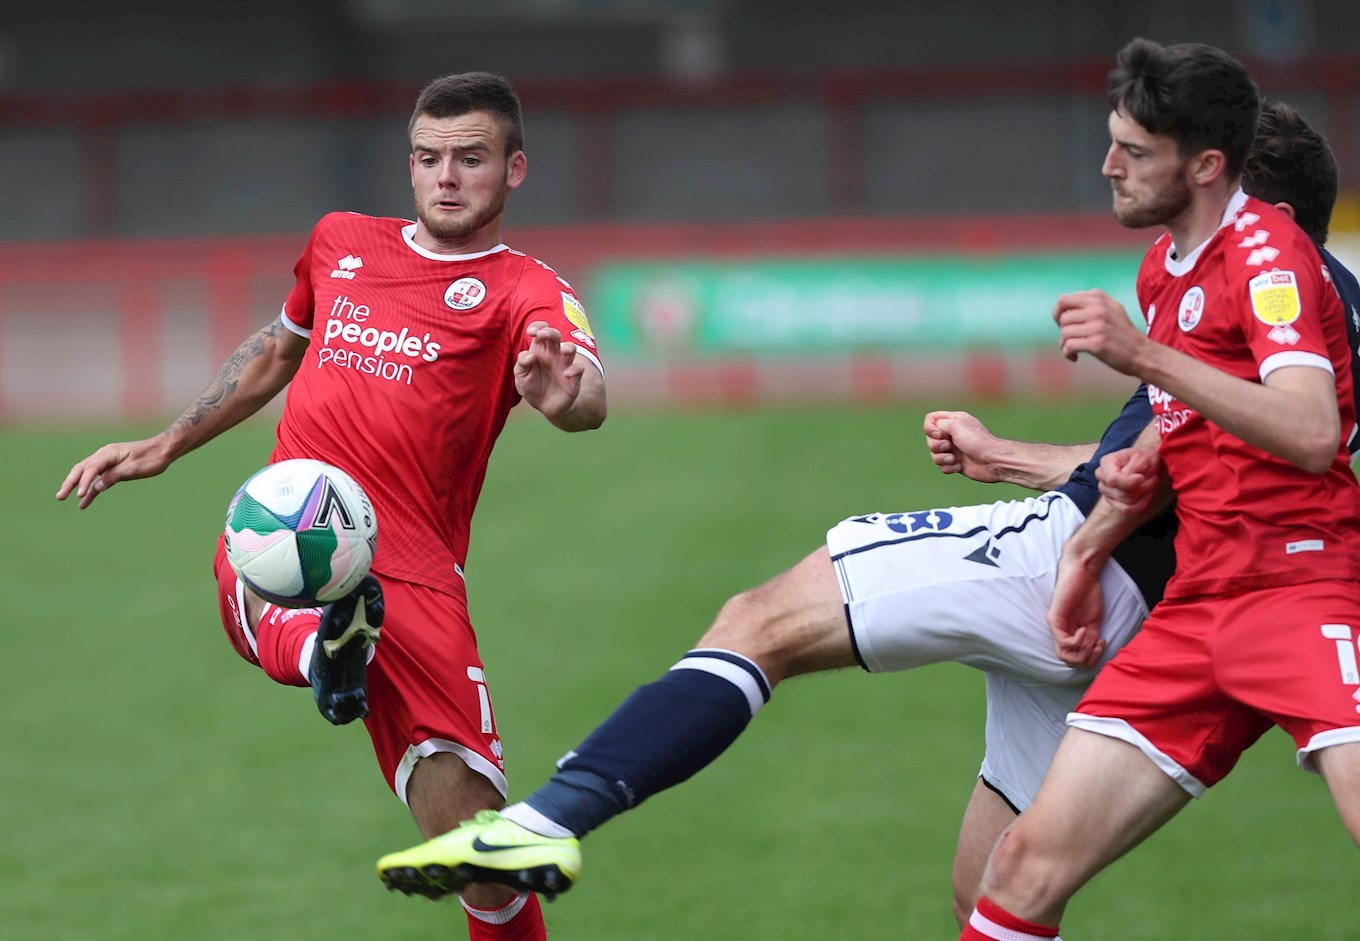 REPORT | CRAWLEY TOWN 1-3 MILLWALL - News - Crawley Town